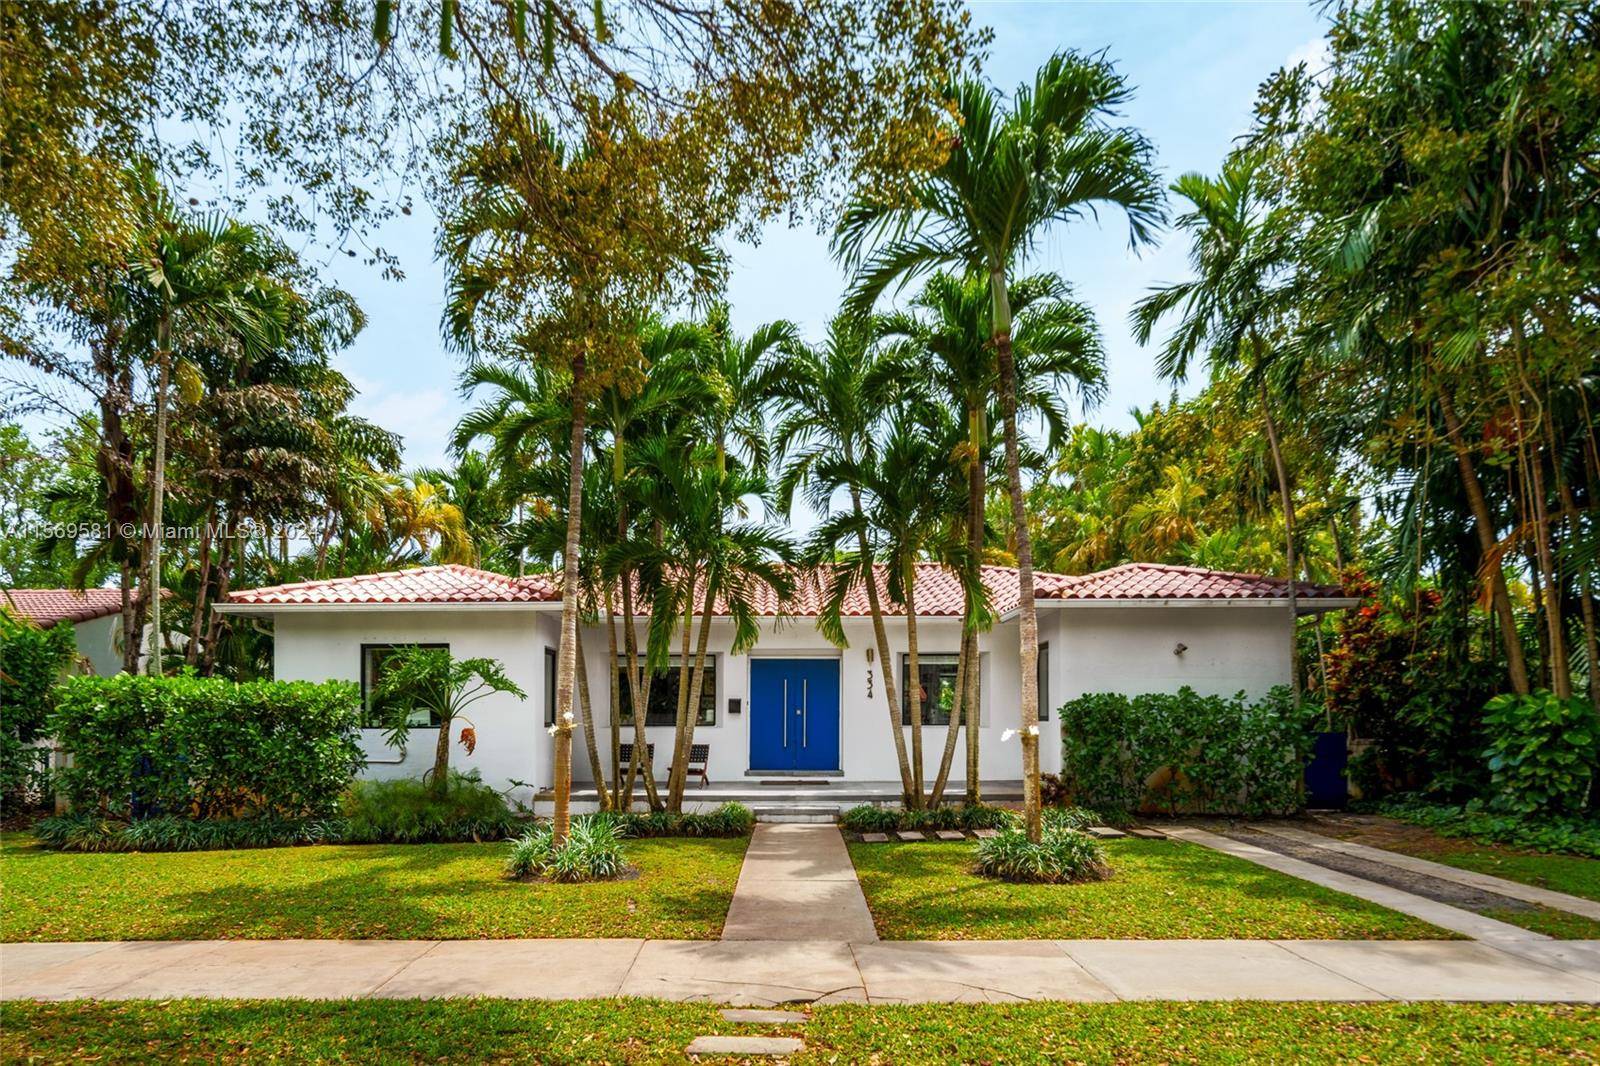 Impeccably updated 3 bedroom 3 bathroom bungalow in the heart of Miami Shores.